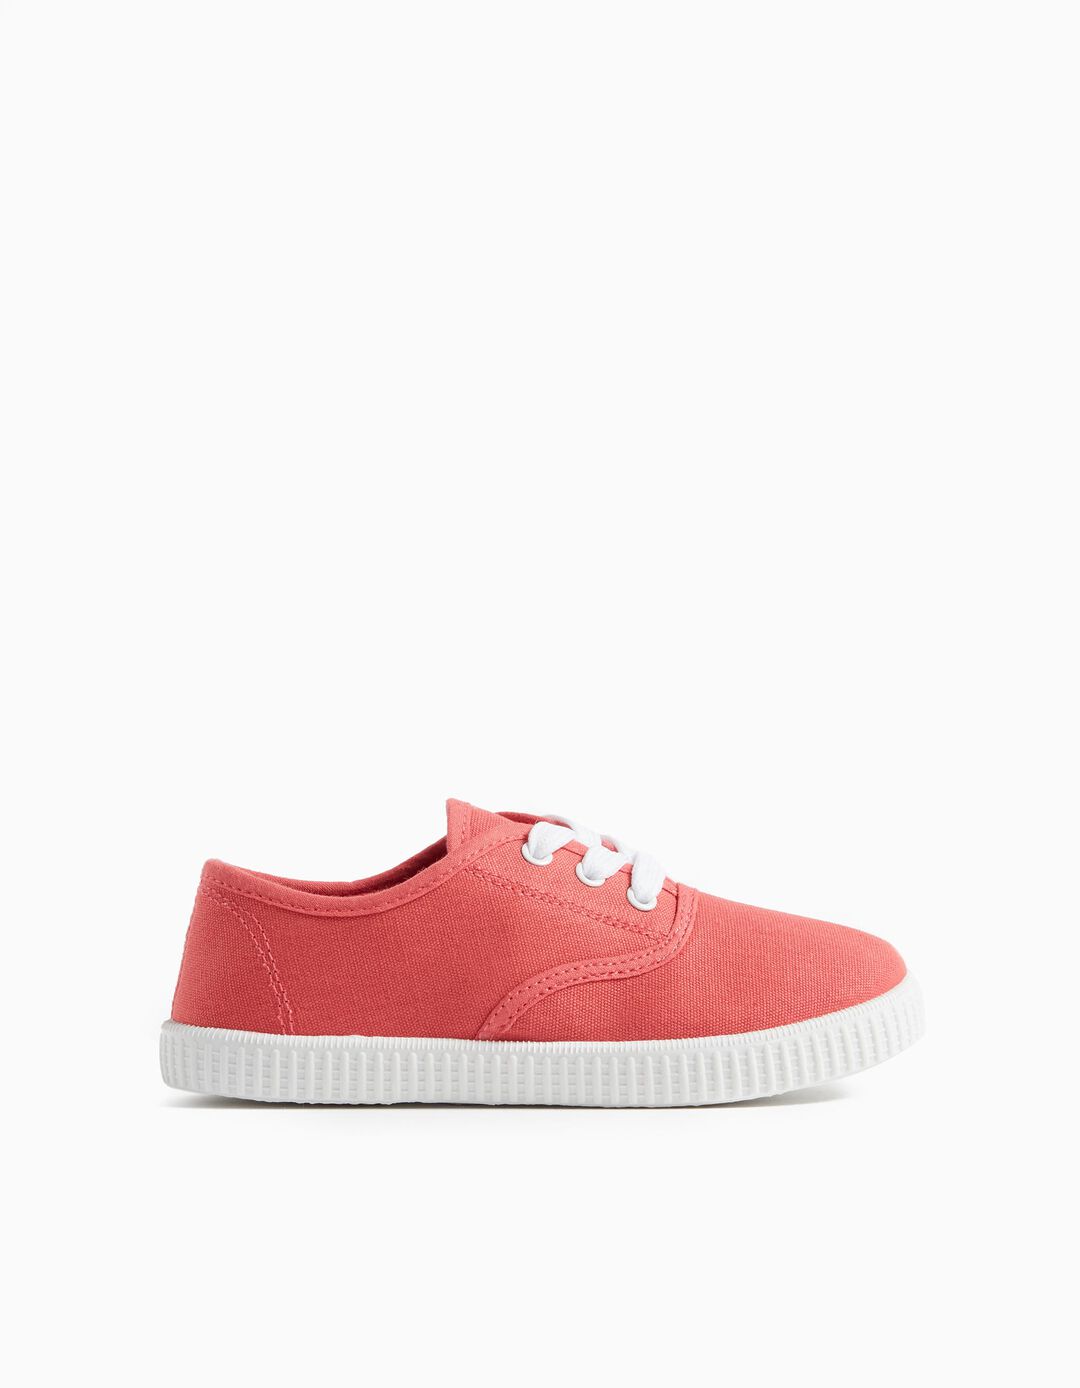 Trainers, Boys, Light Red